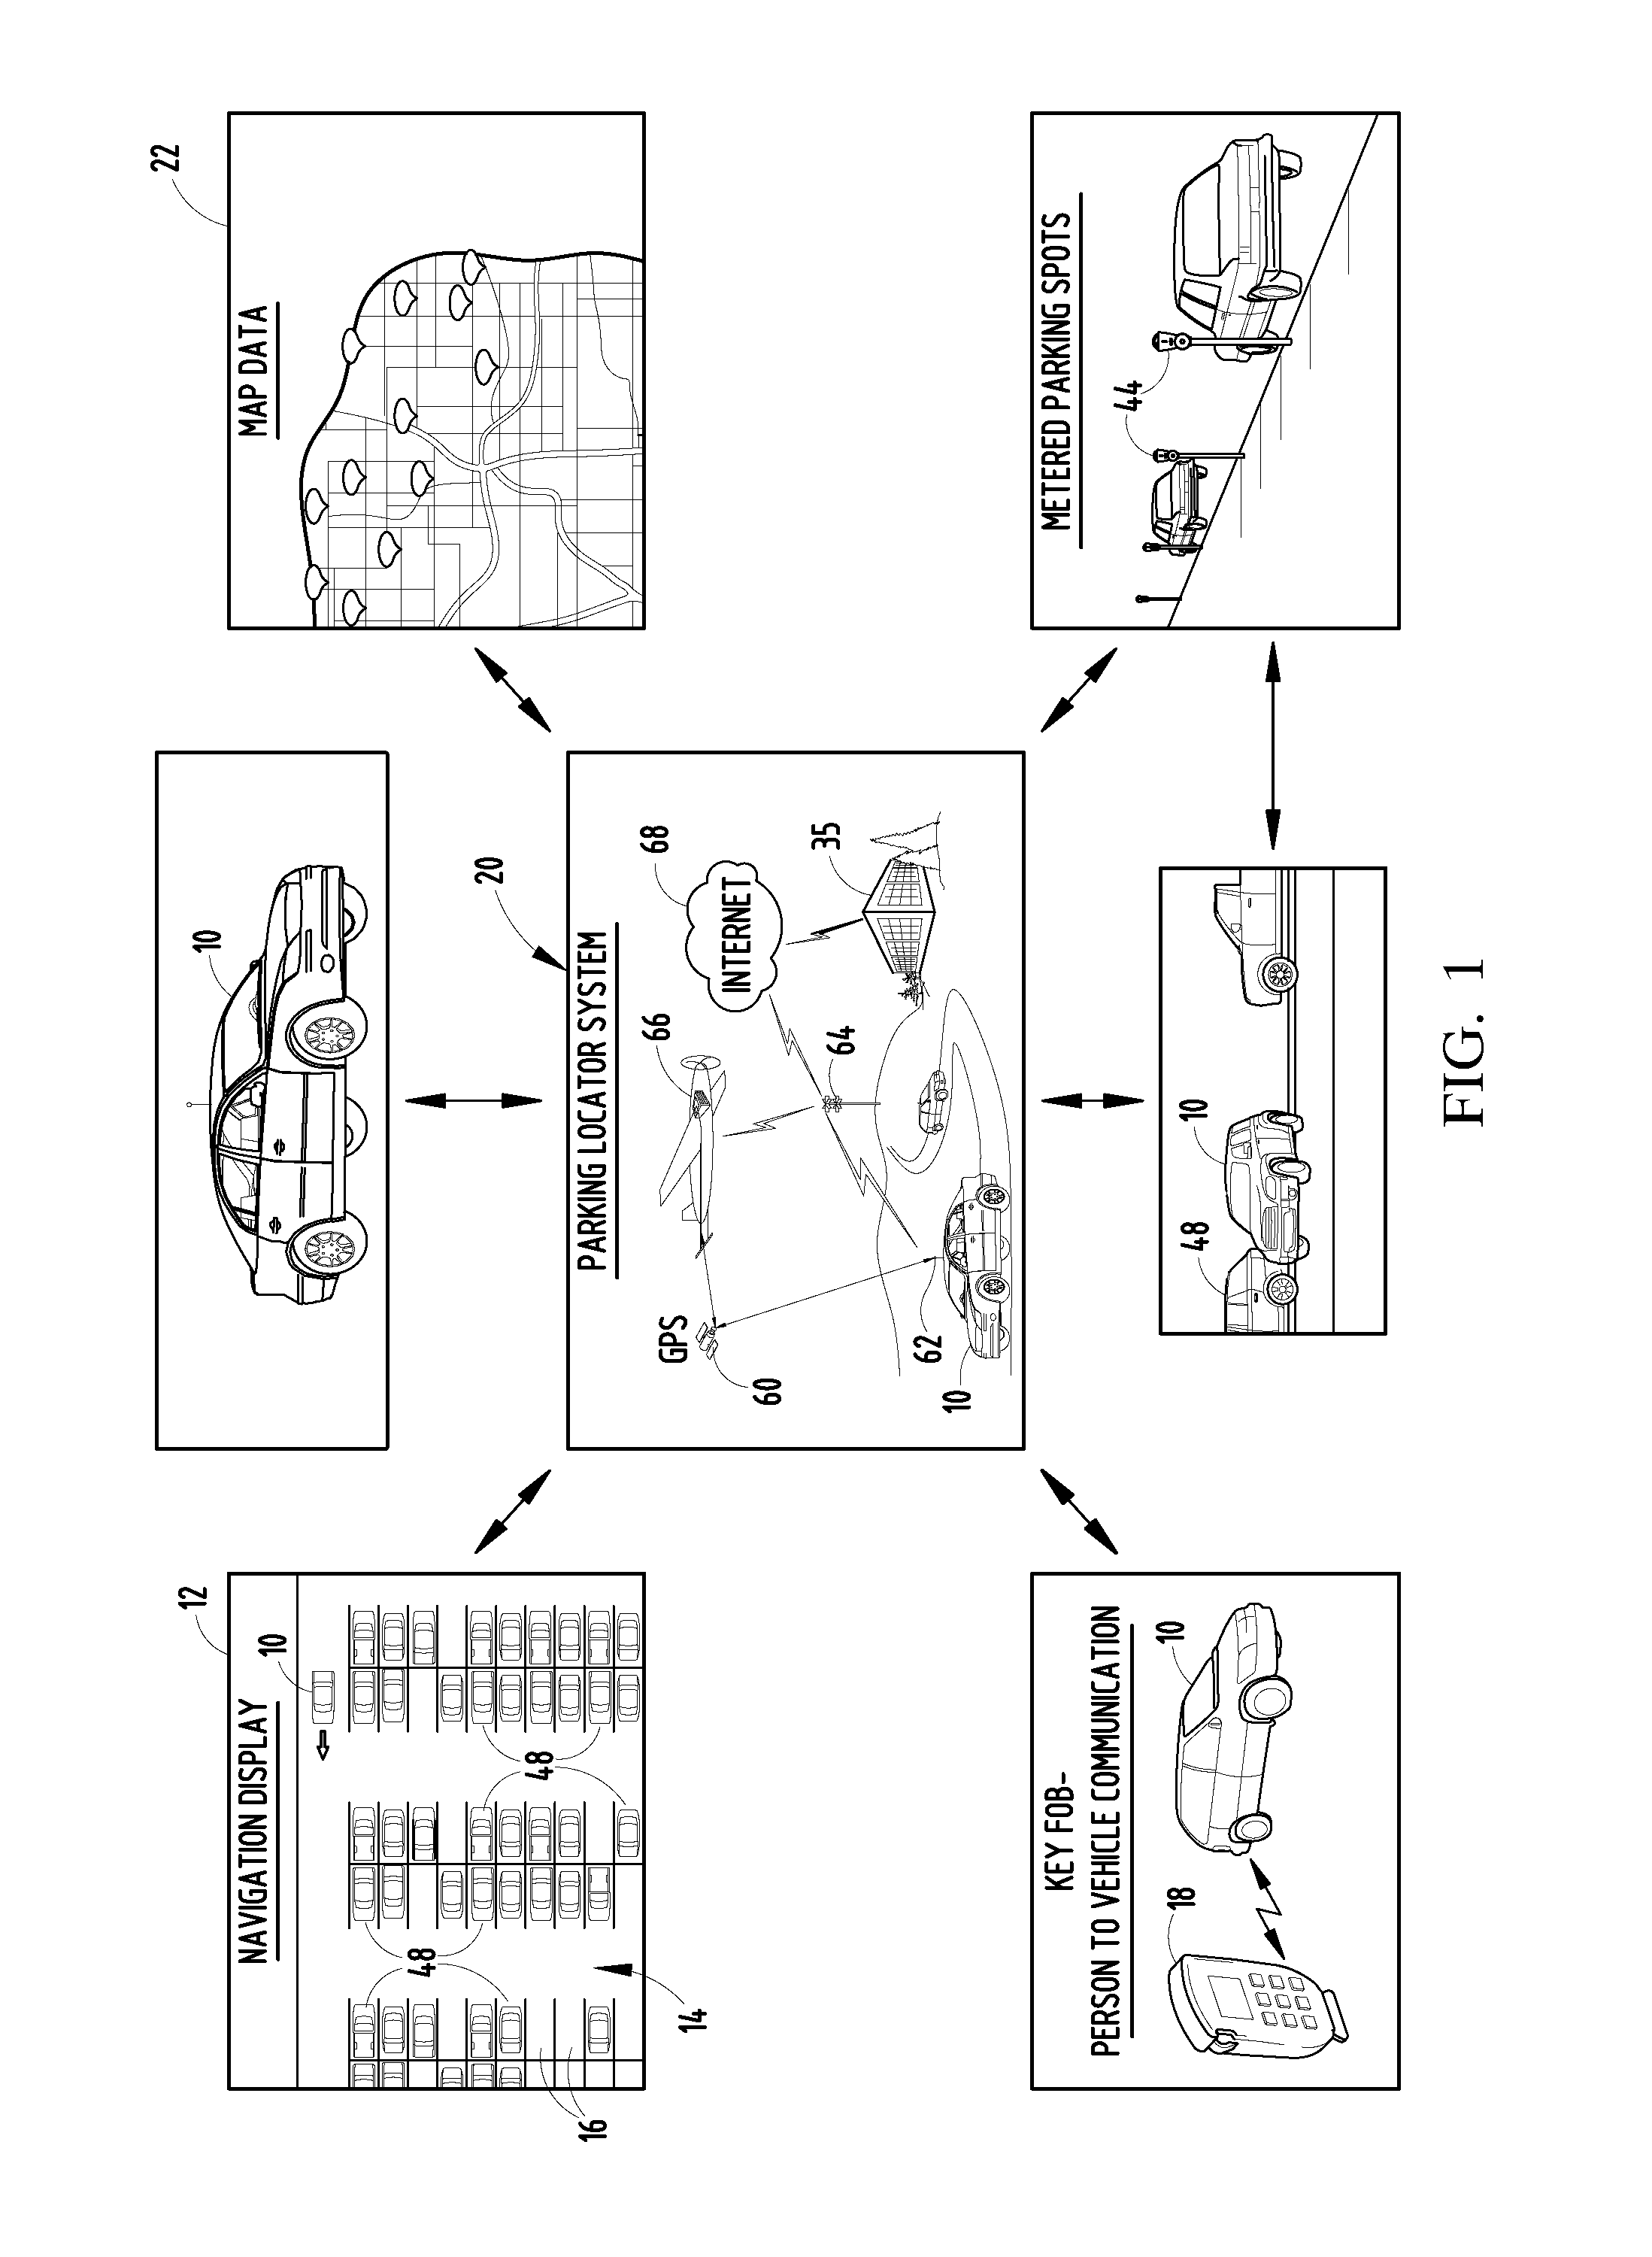 Vehicle parking spot locator system and method using connected vehicles